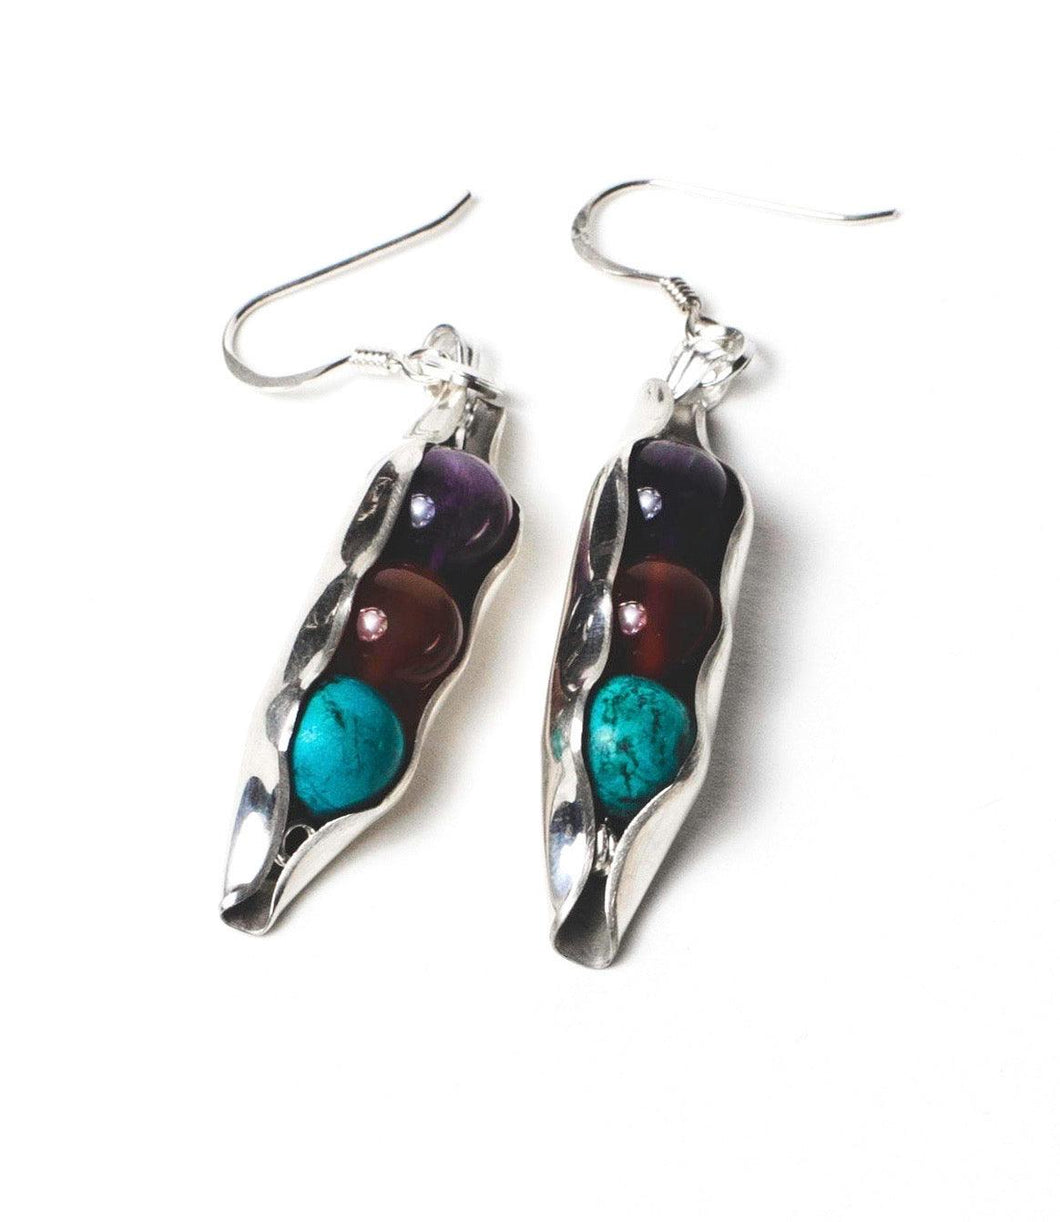 Three Peas In A Pod Earrings - Choose your birthstone combination